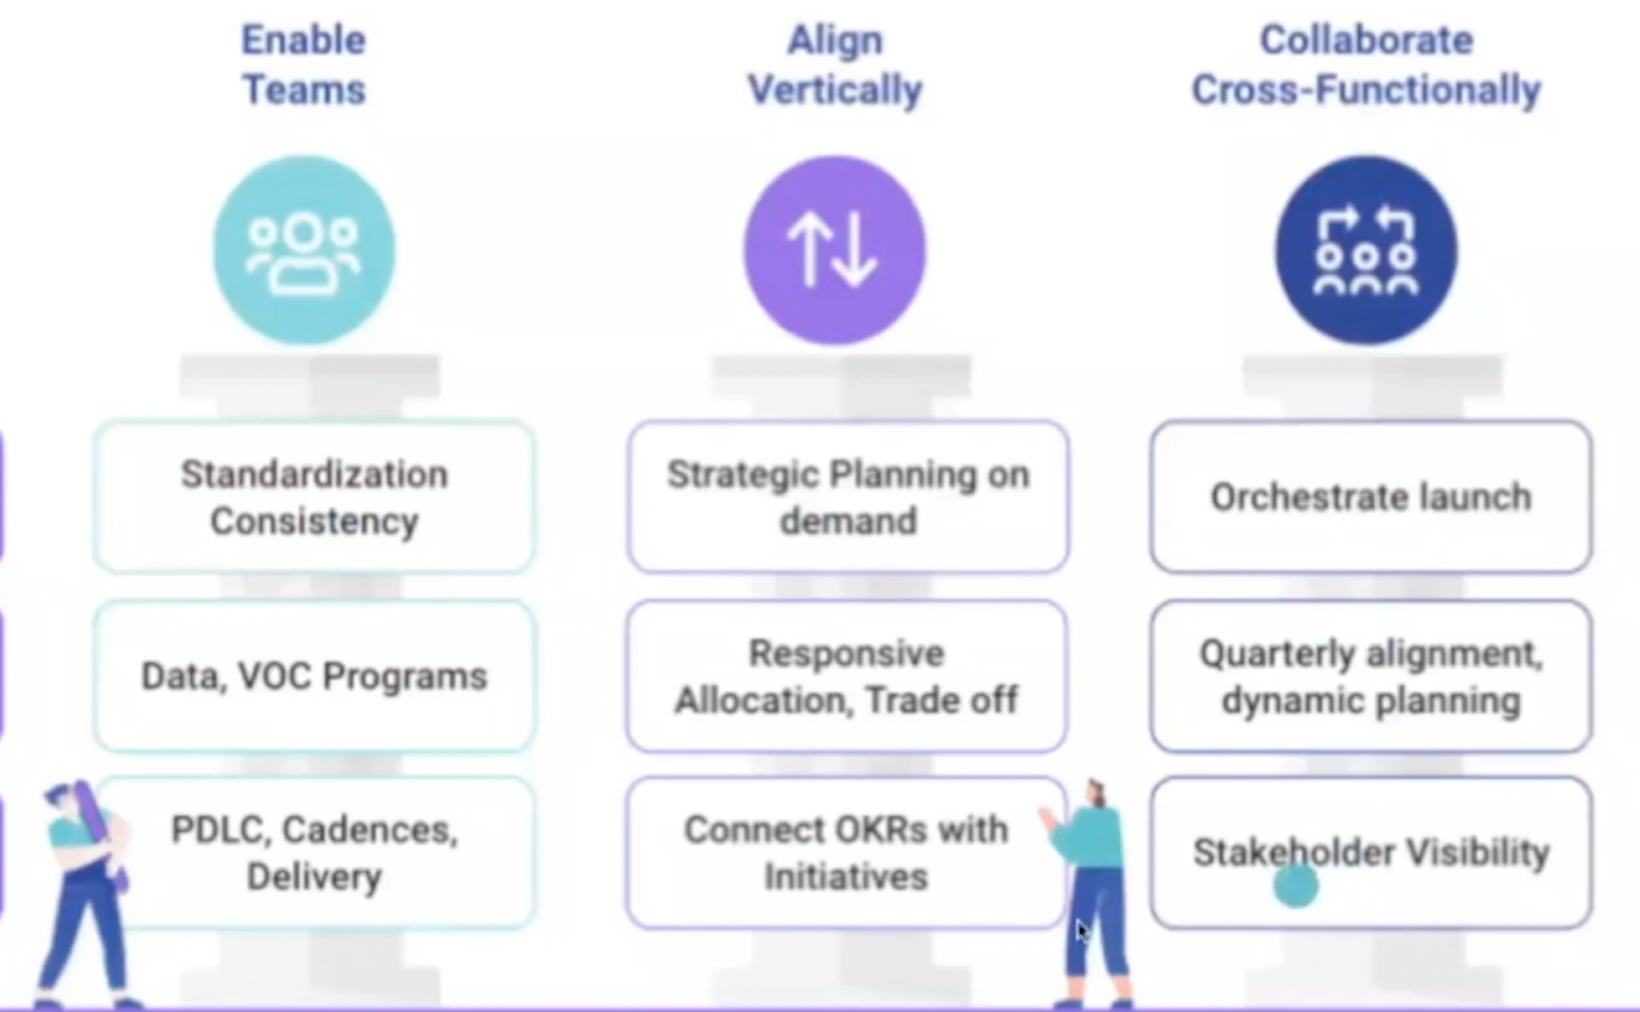 Pillars of product ops - ‘enable teams,’ ‘align vertically,’ and ‘collaborate cross-functionally